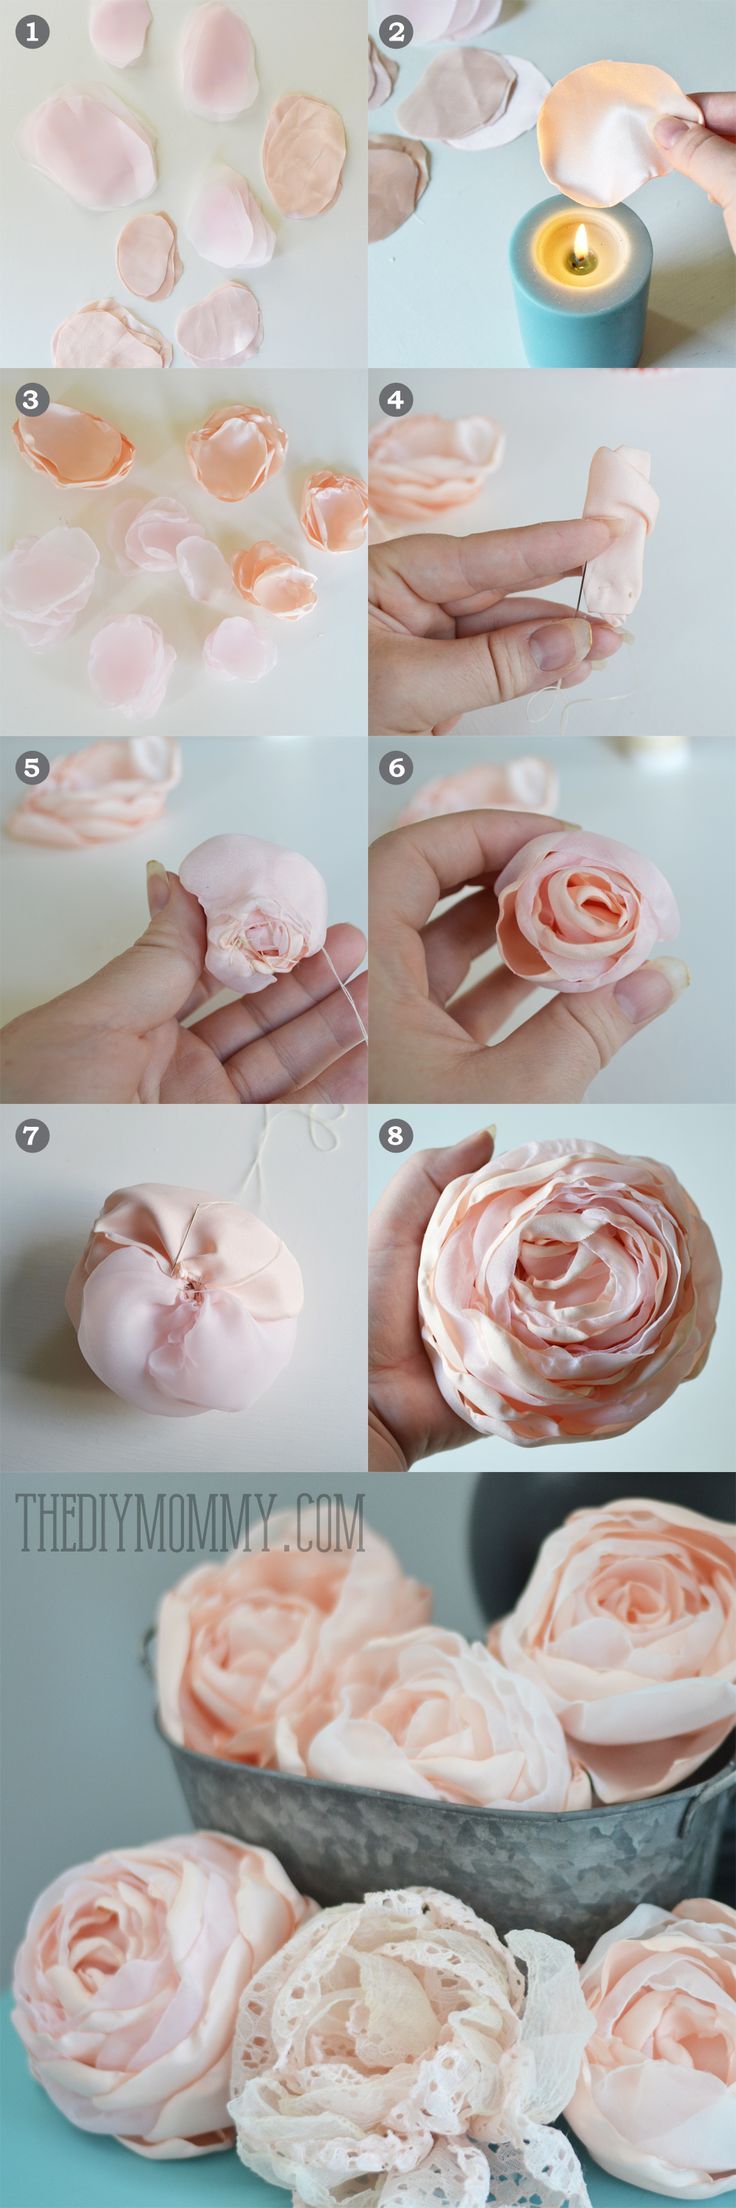 How to make a paper flower naricissus - The House That Lars Built